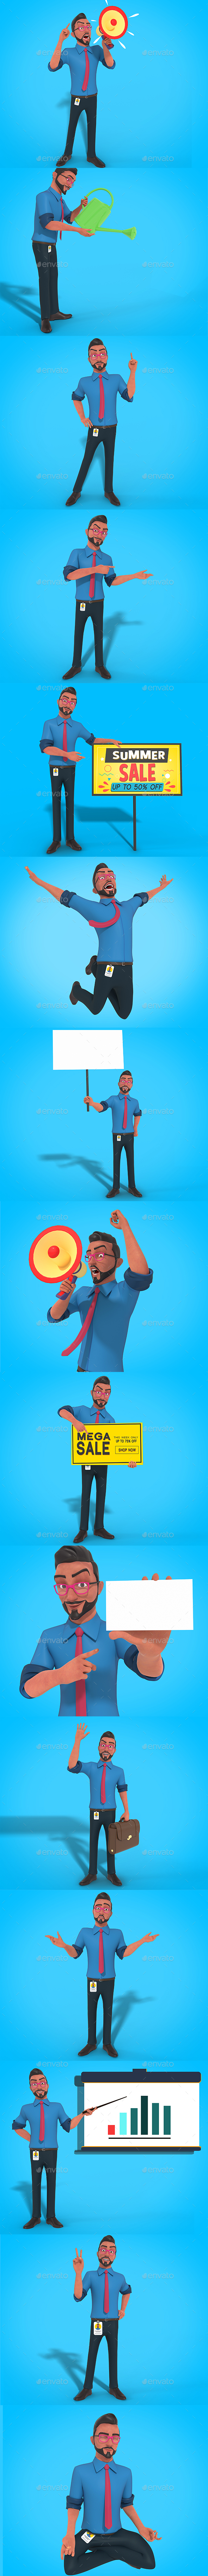 Mr Bob 3D Character Business Mascot Actions Fully Editable Psd